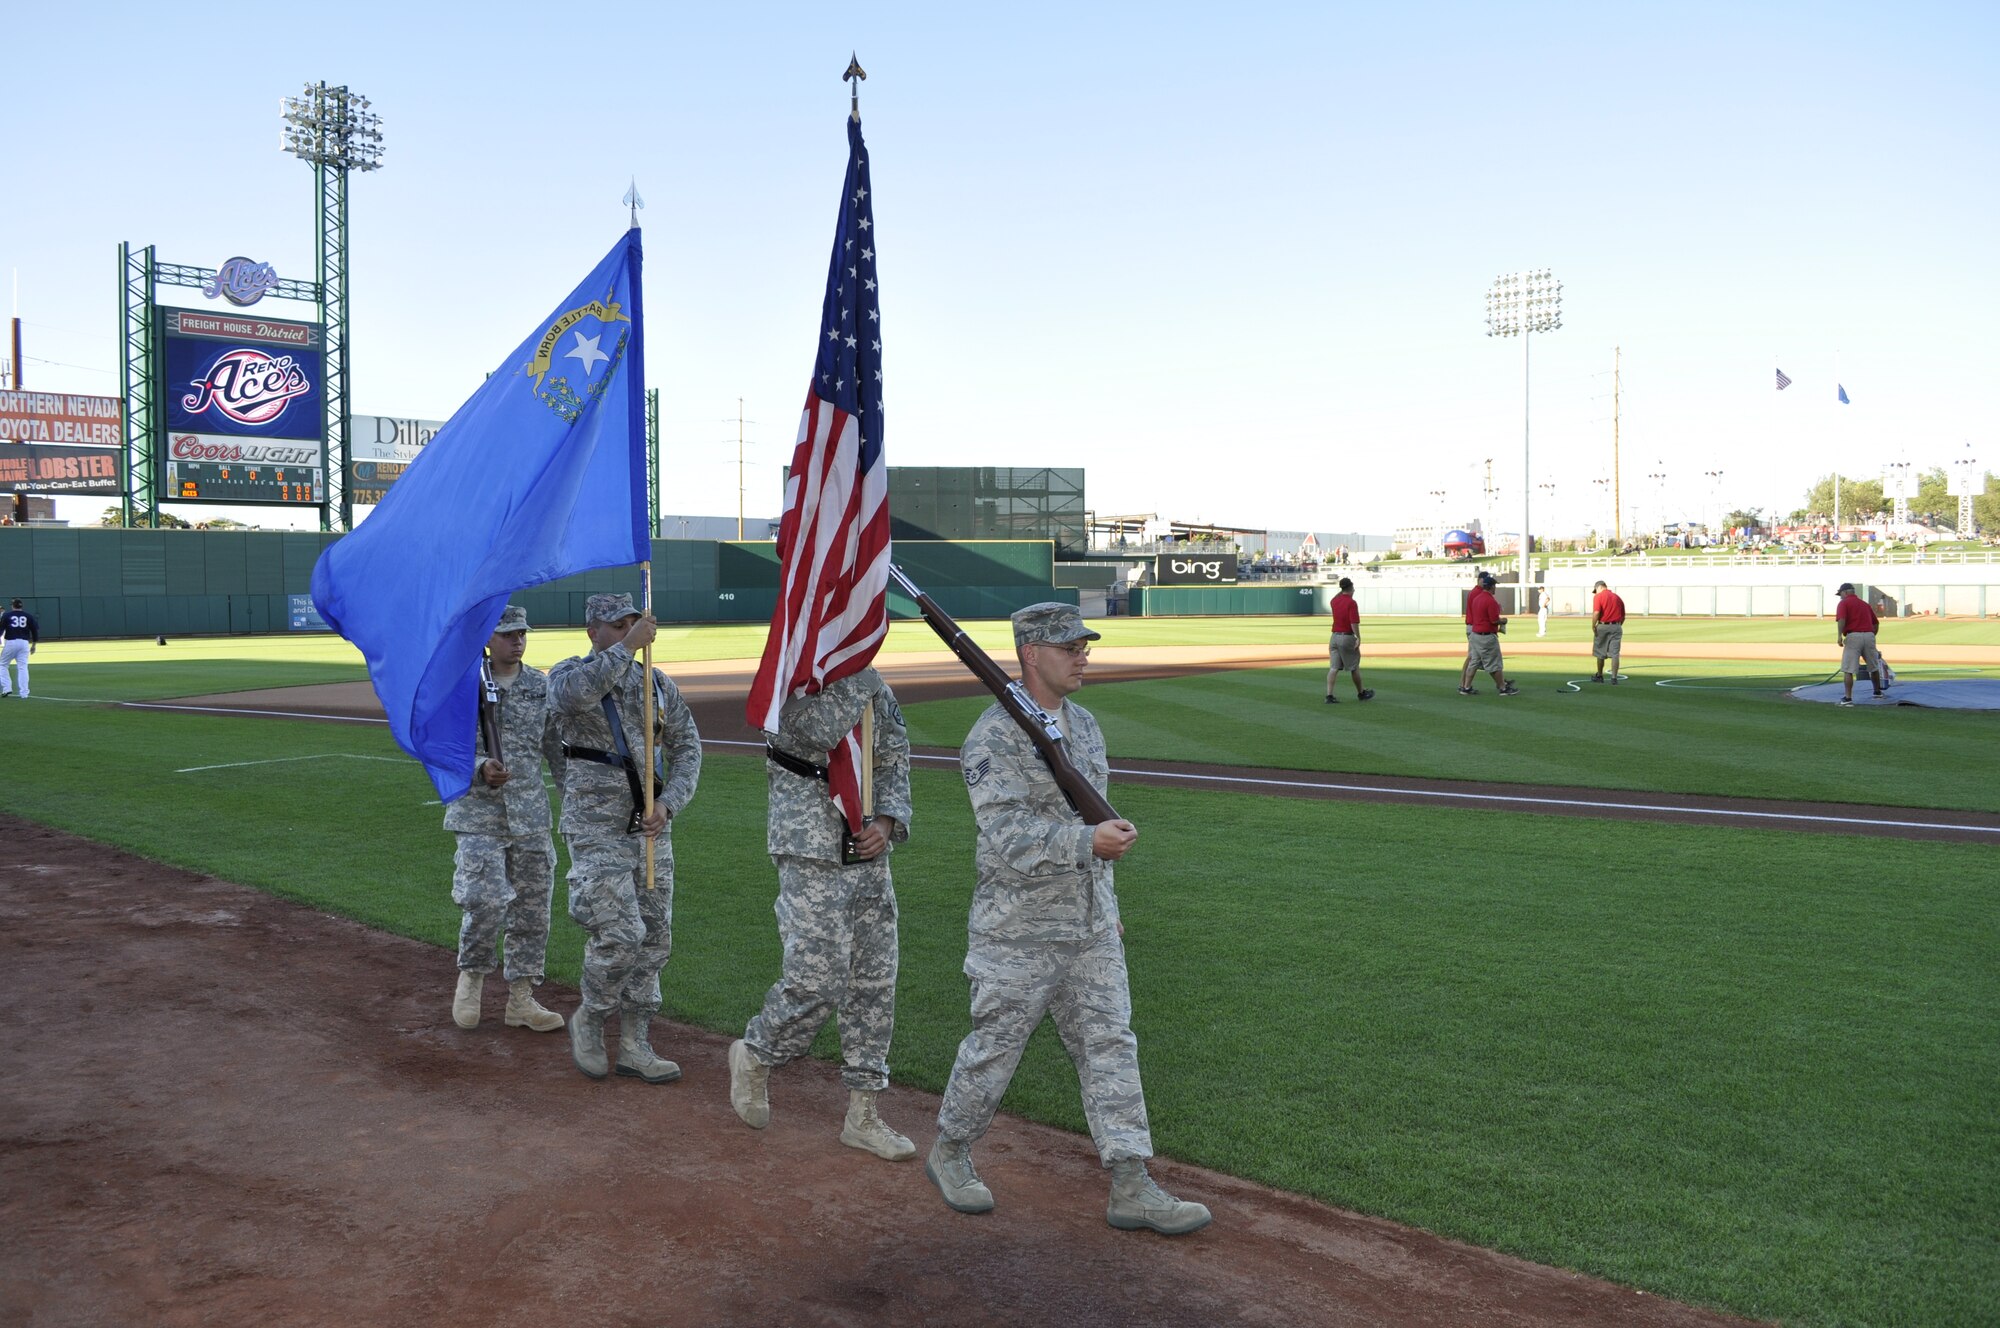 Members of the NV Honor Guard marching onto the field at the Reno Aces Military Appreciation night.